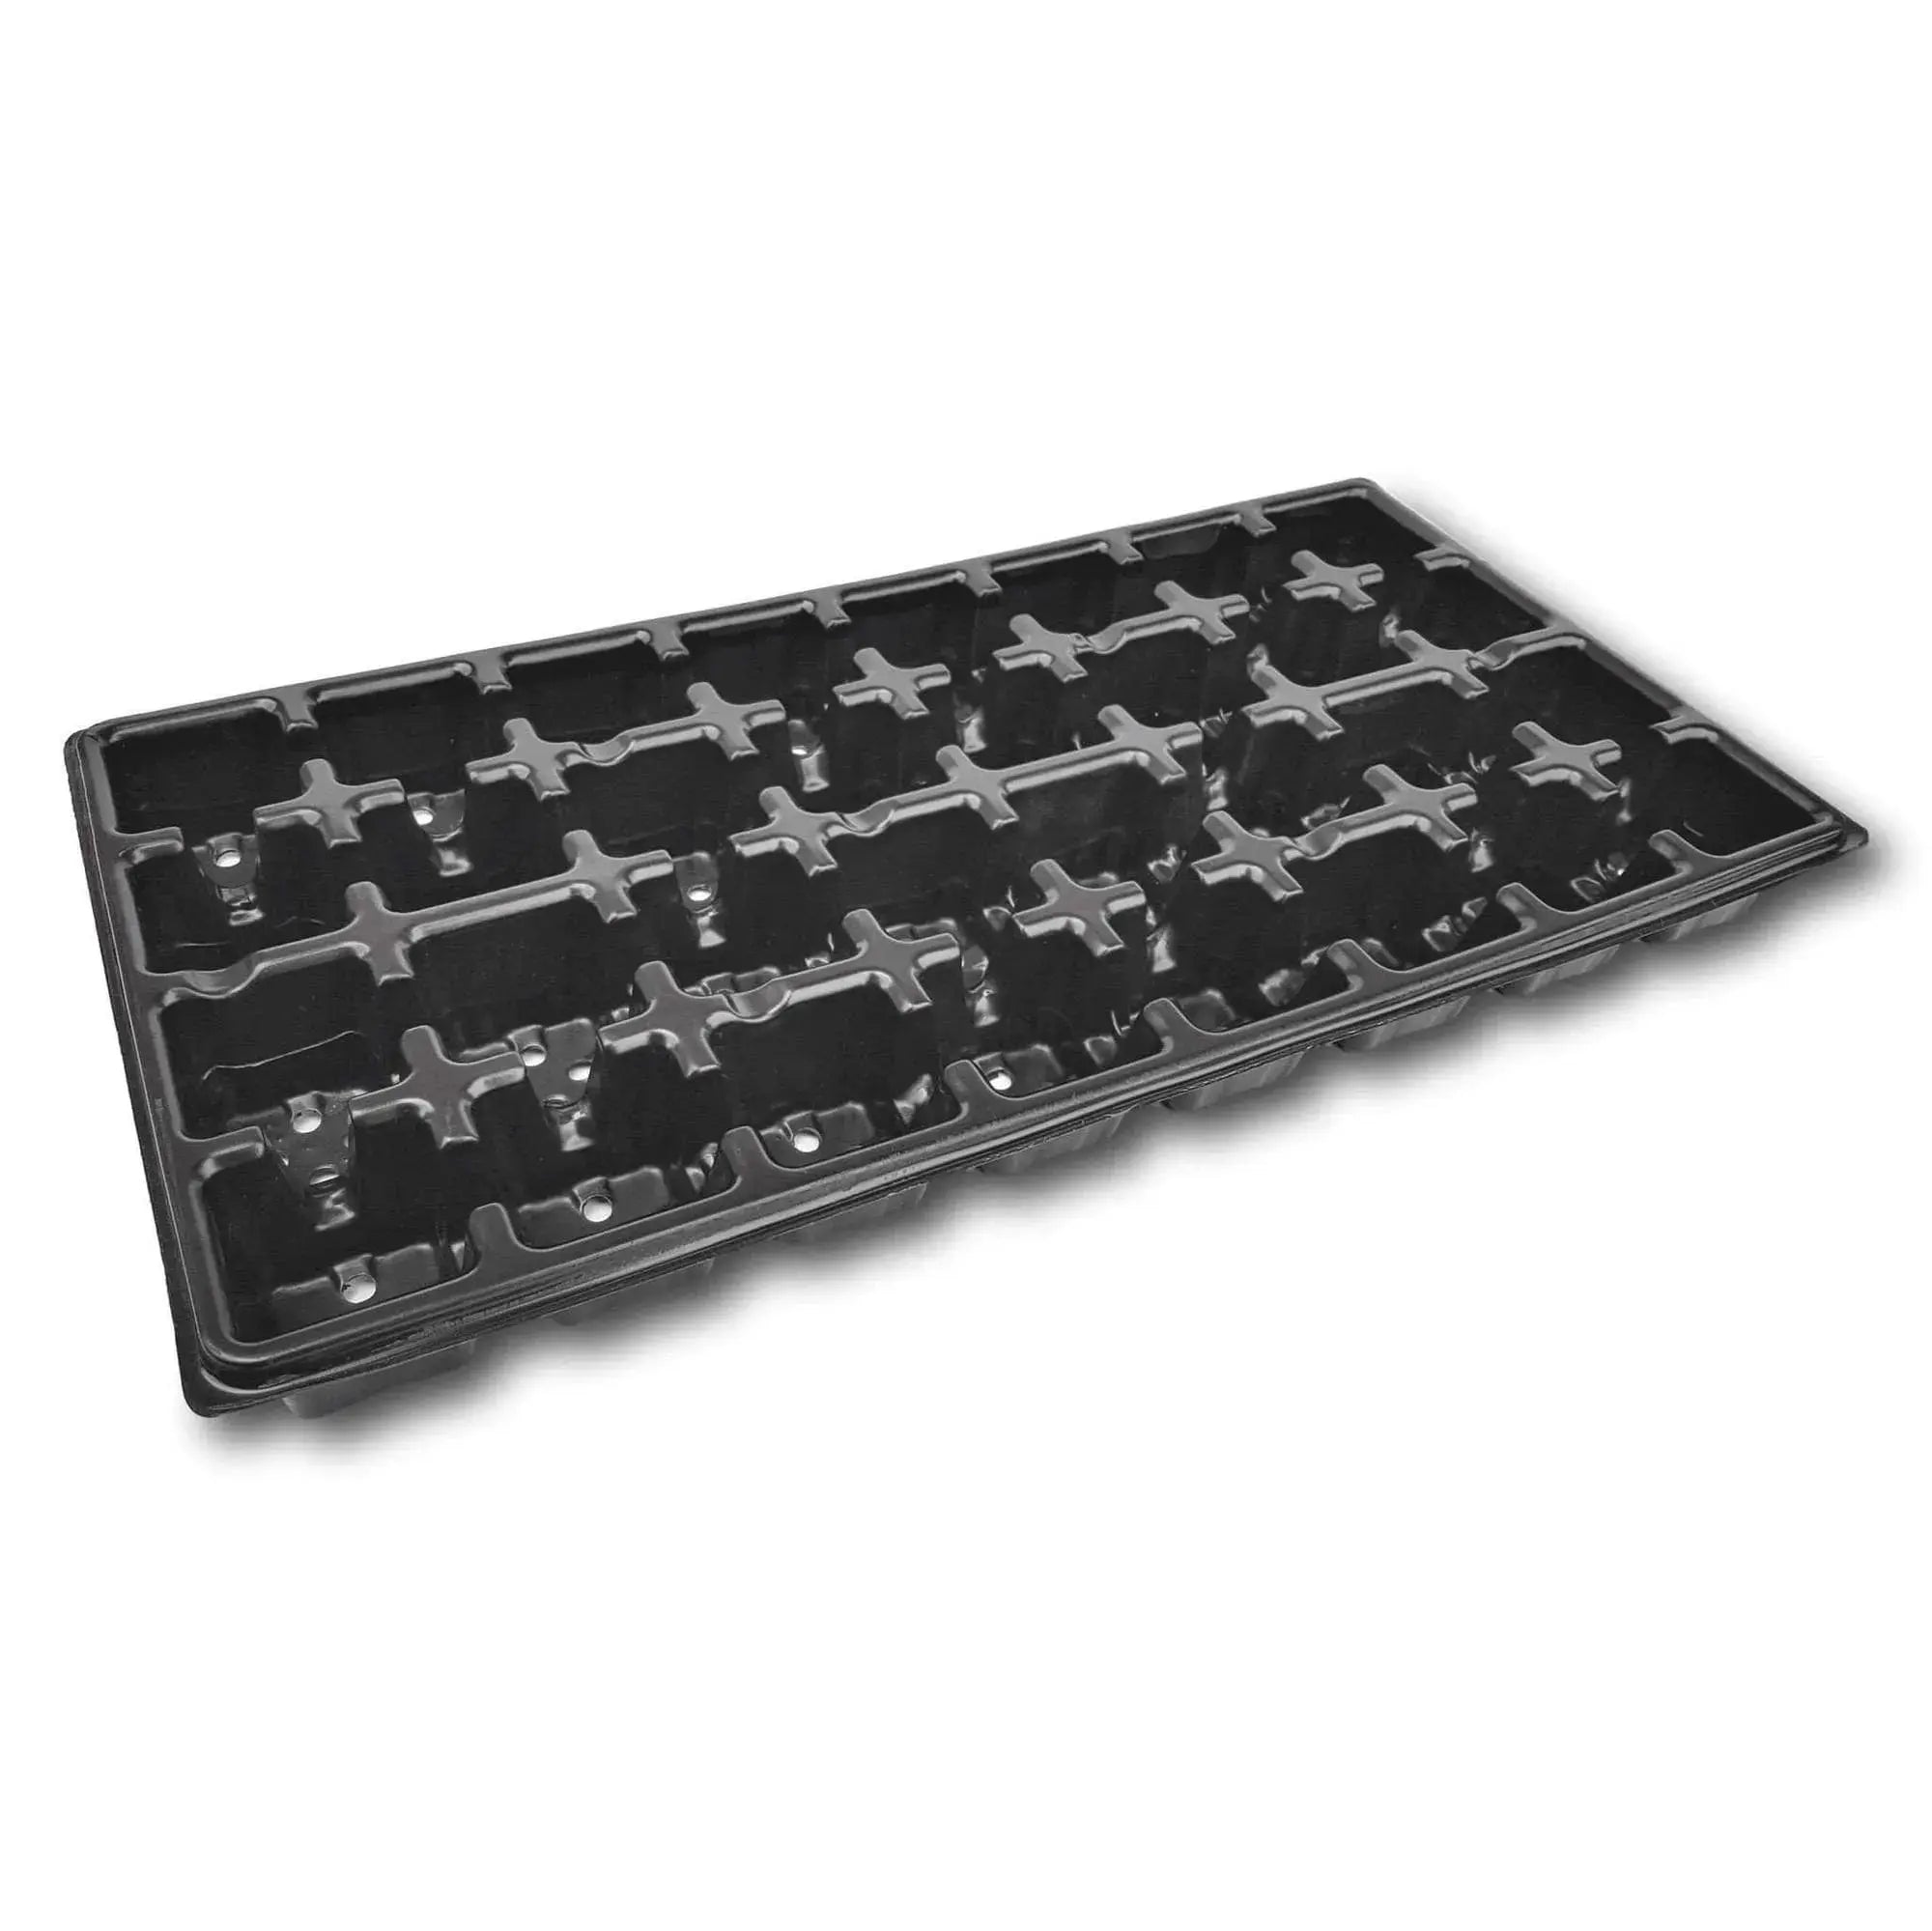 Bootstrap Farmer Tray Insert for 2.5" Seed Starting Pots | 32 Cell